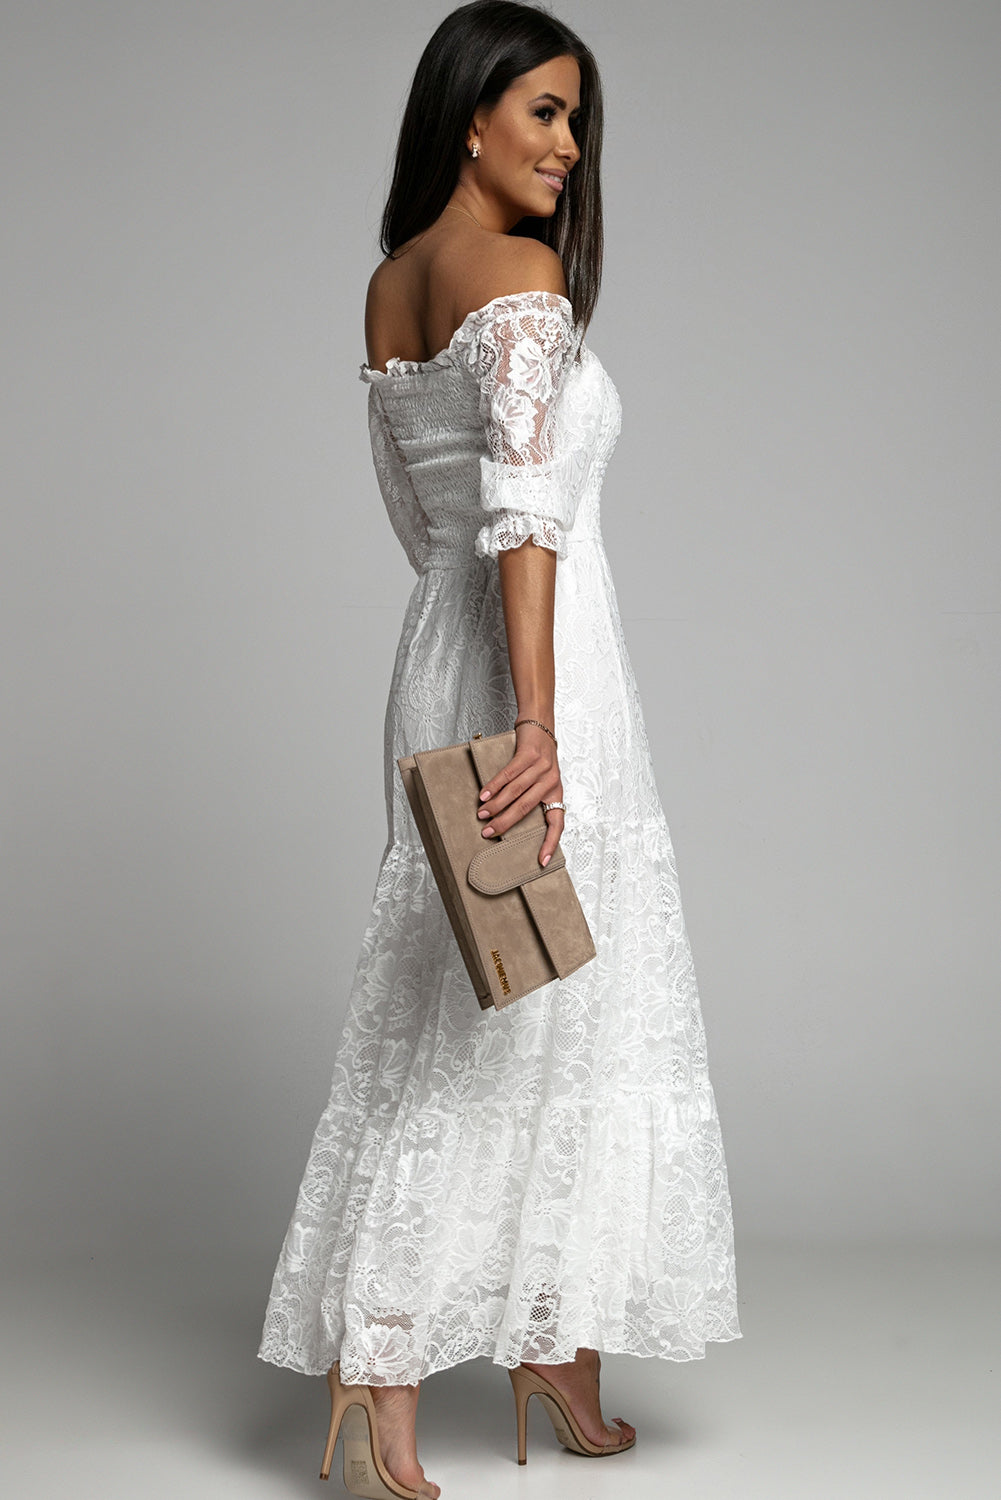 White Prom Dress Smocked Lace Maxi Dress for Women